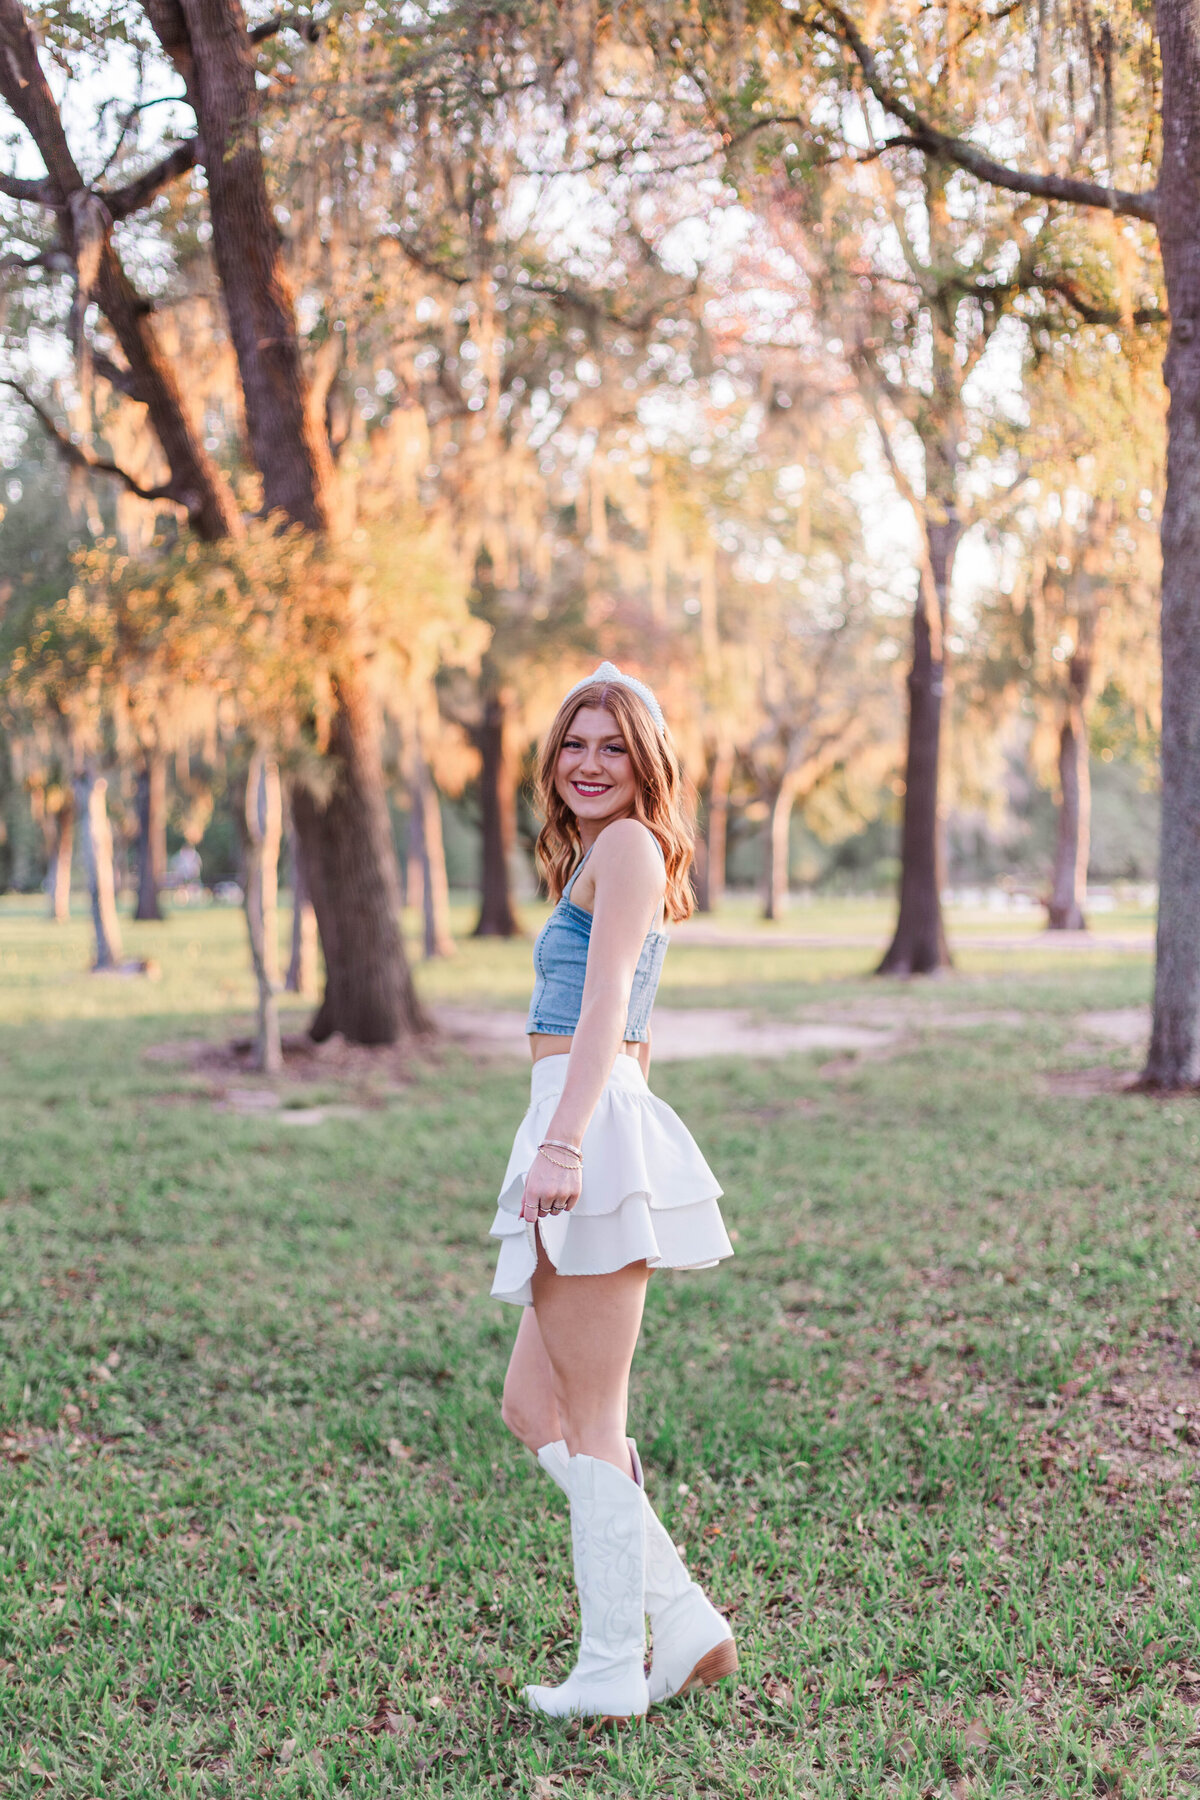 A cowgirl from santa fe high school stands in a field with mossy trees while wearing a denim vest, white leather skirt, and white cowboy boots